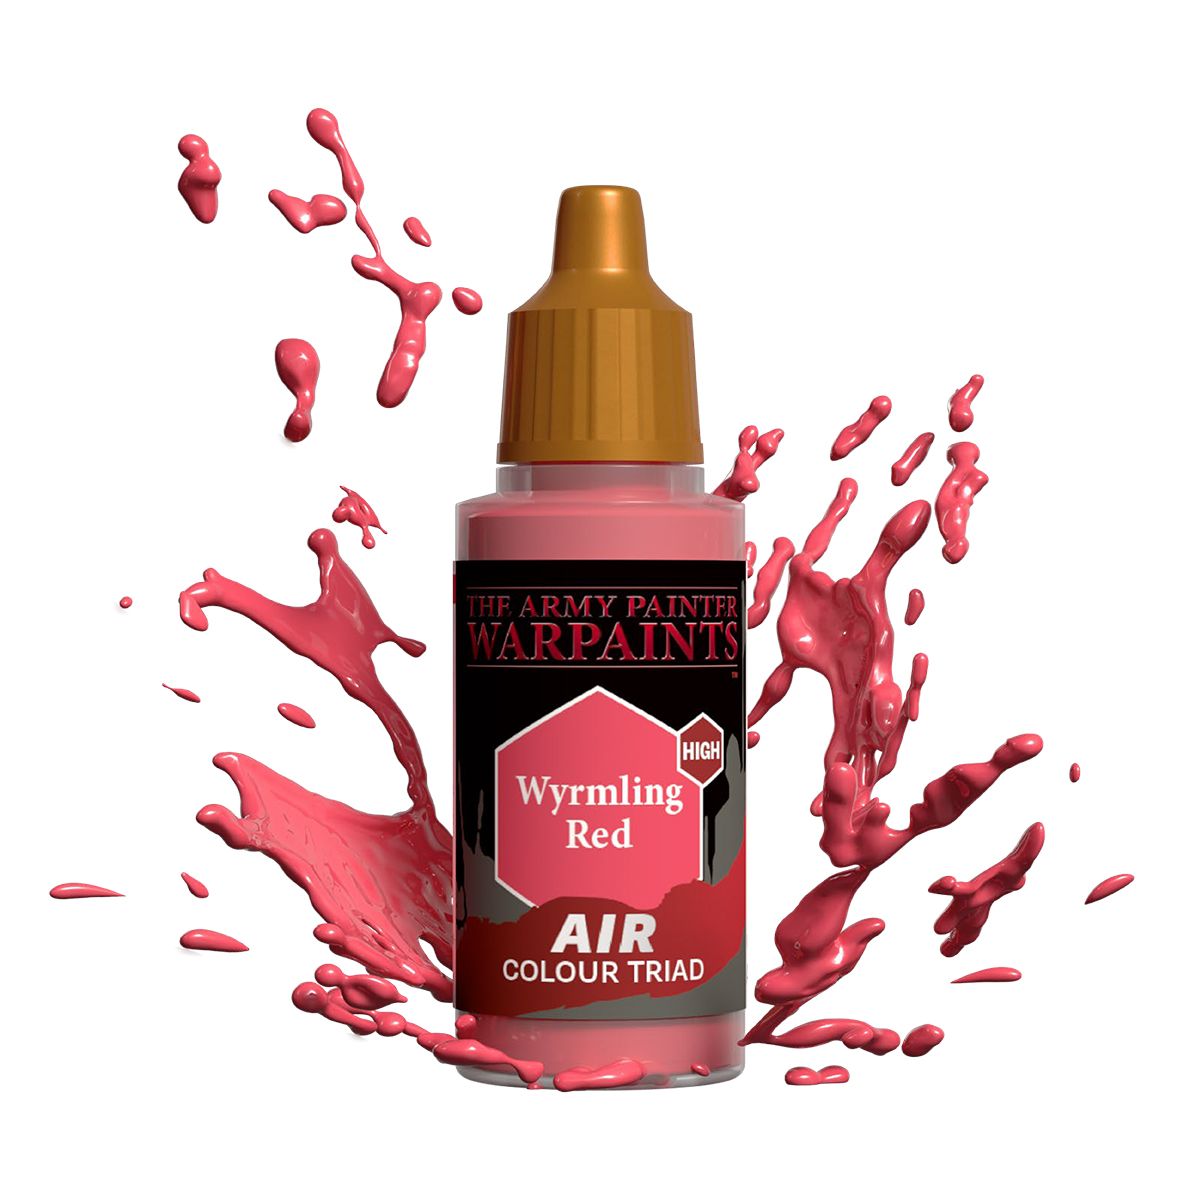 Army Painter Warpaints Air: Wyrmling Red 18ml